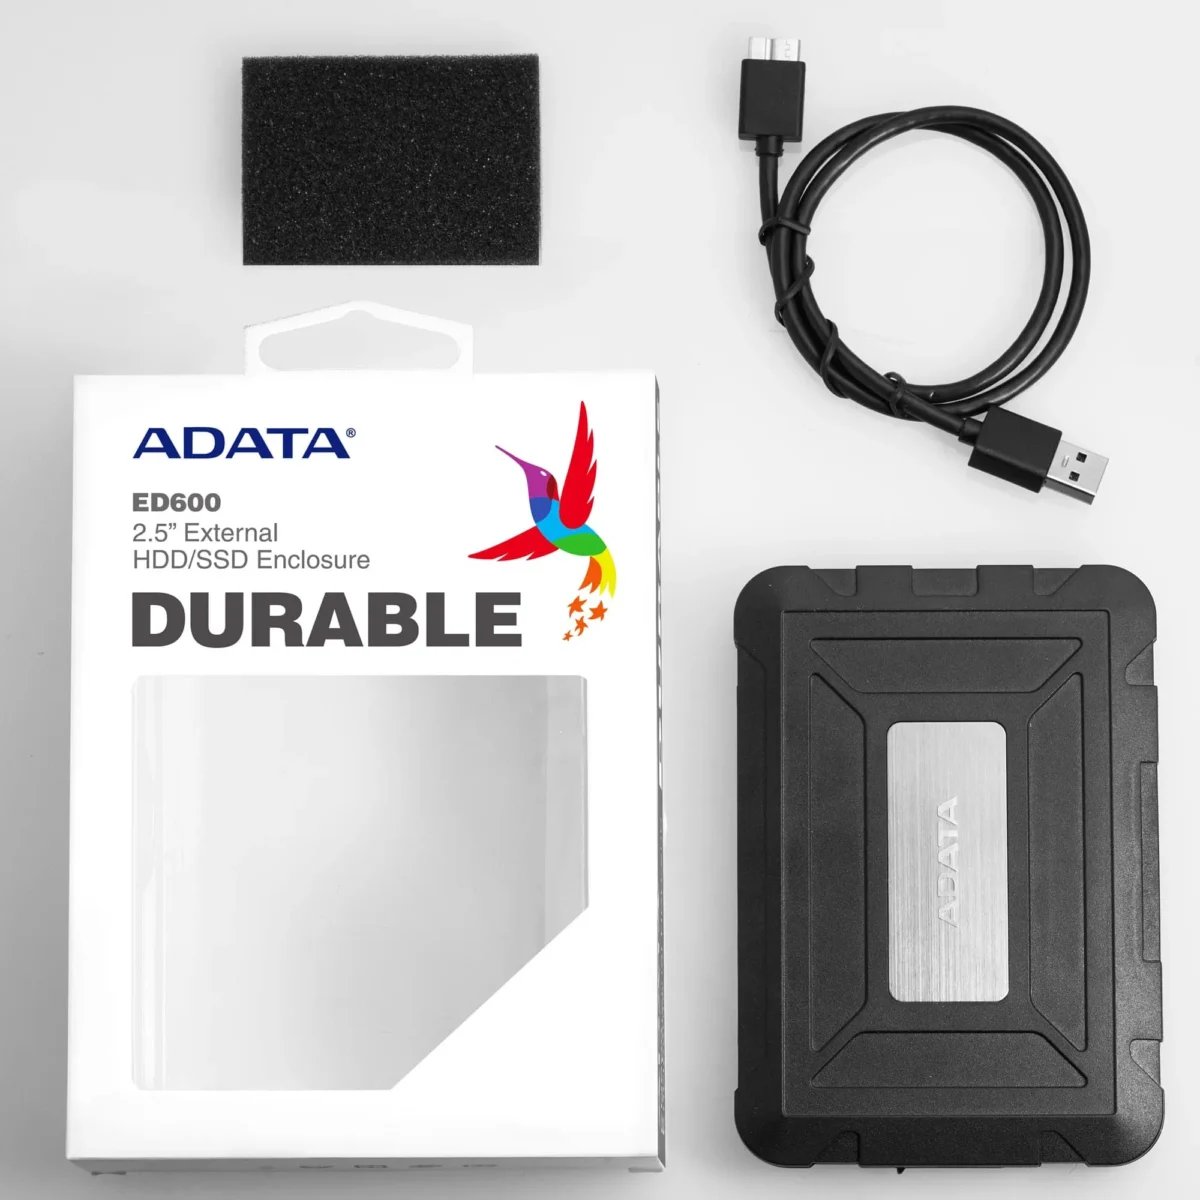 ADATA-ED600-External-Enclosure-Case-cover-for-SSD-HDD-Drive-in-Dubai-Abu-dhabi-sharjah-fast -Delivery-3